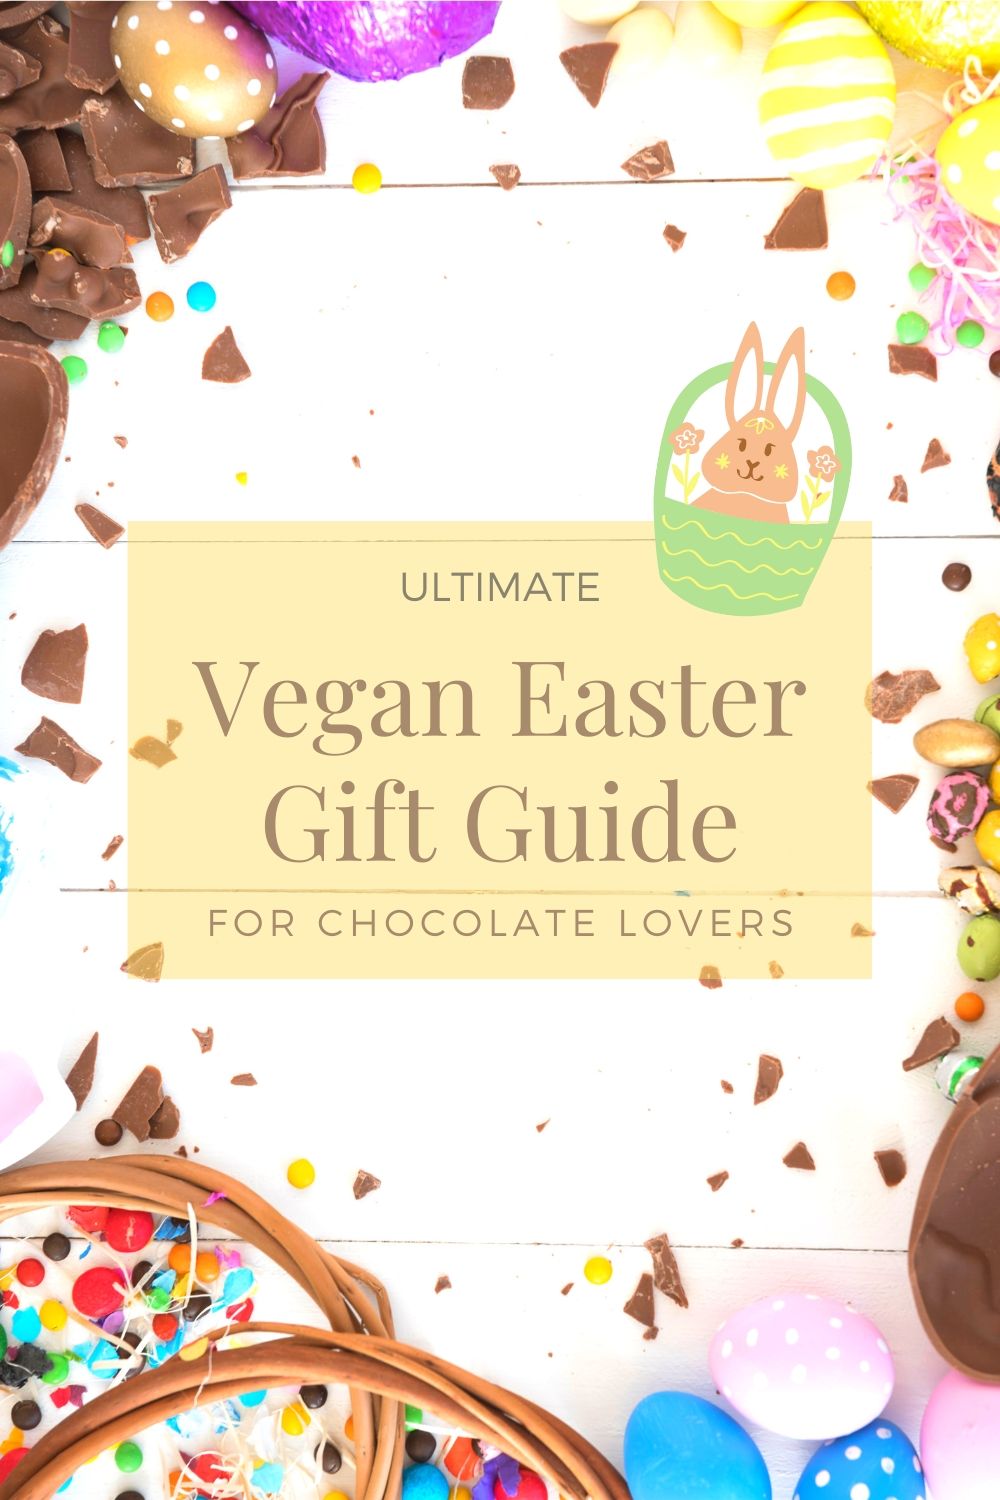 Ultimate Vegan Easter gift guide for chocolate lovers